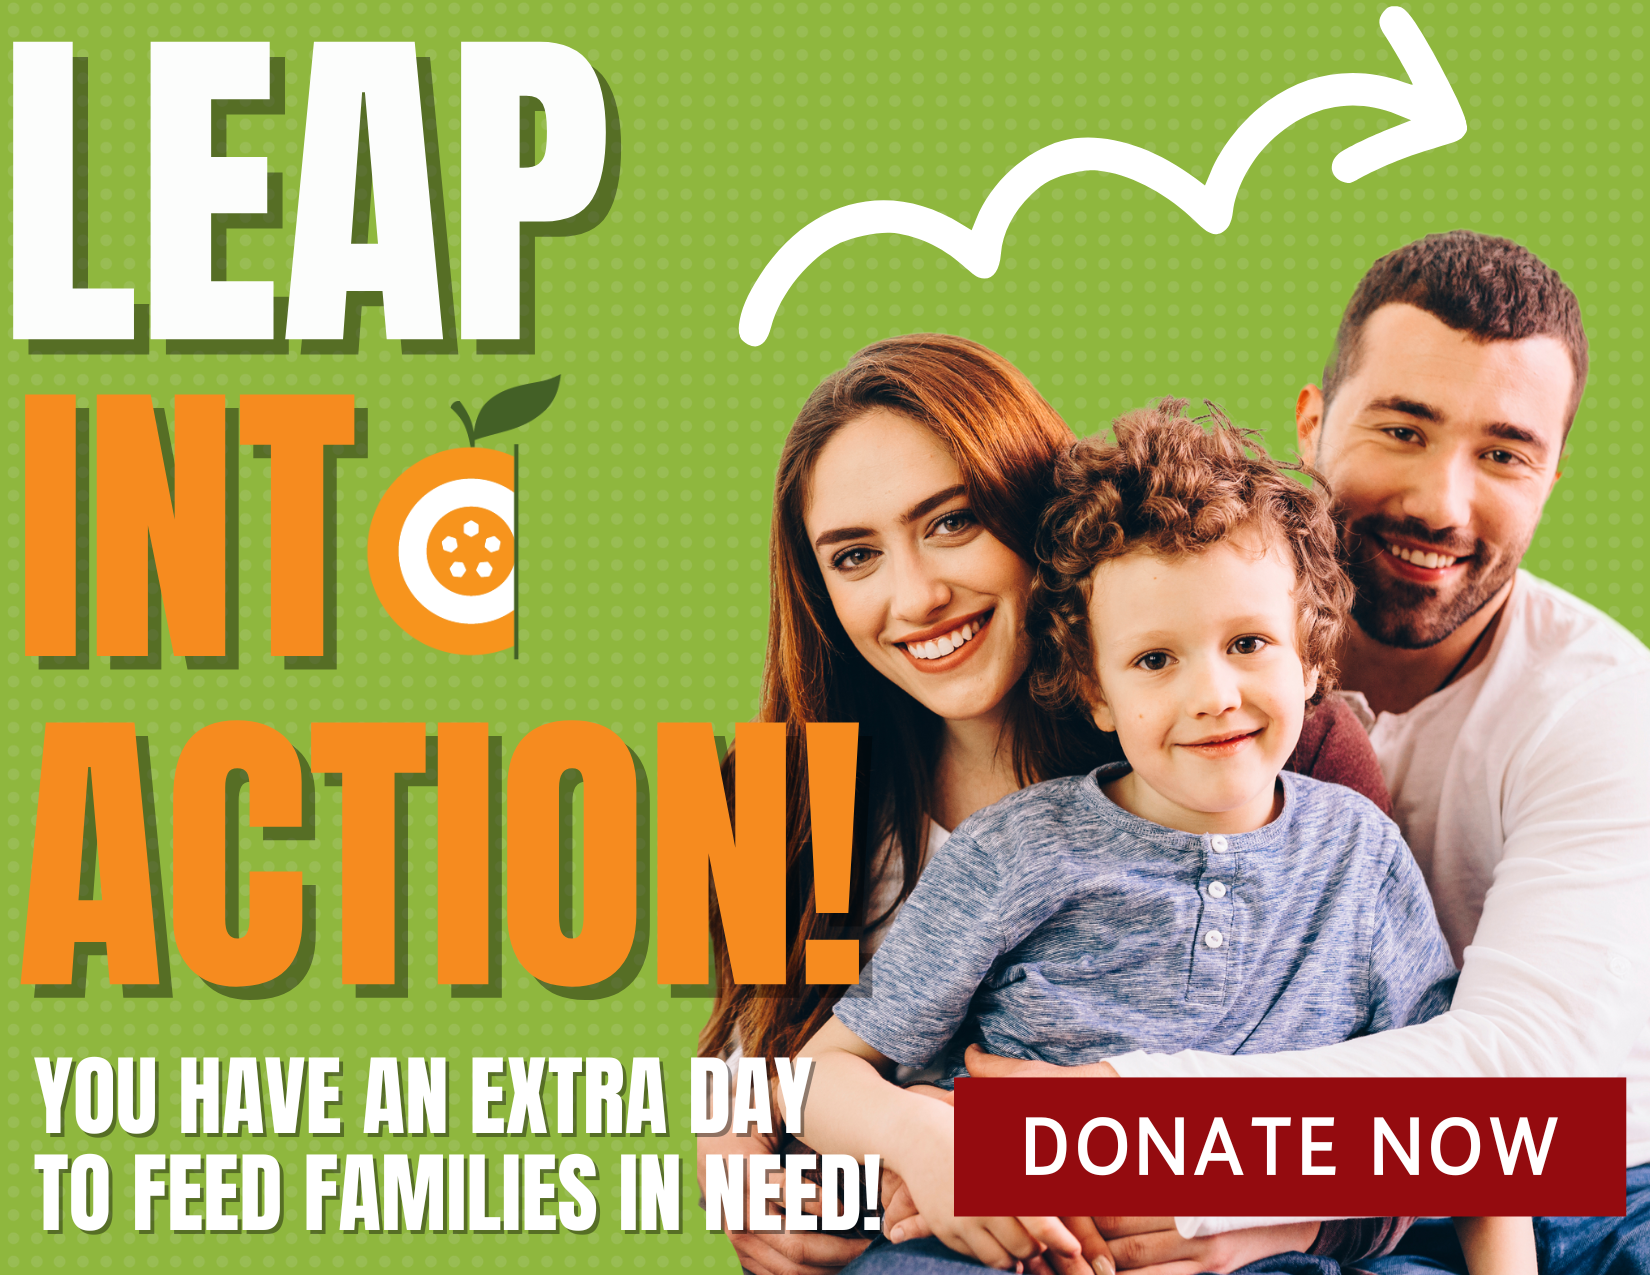 Donate: Leap into action